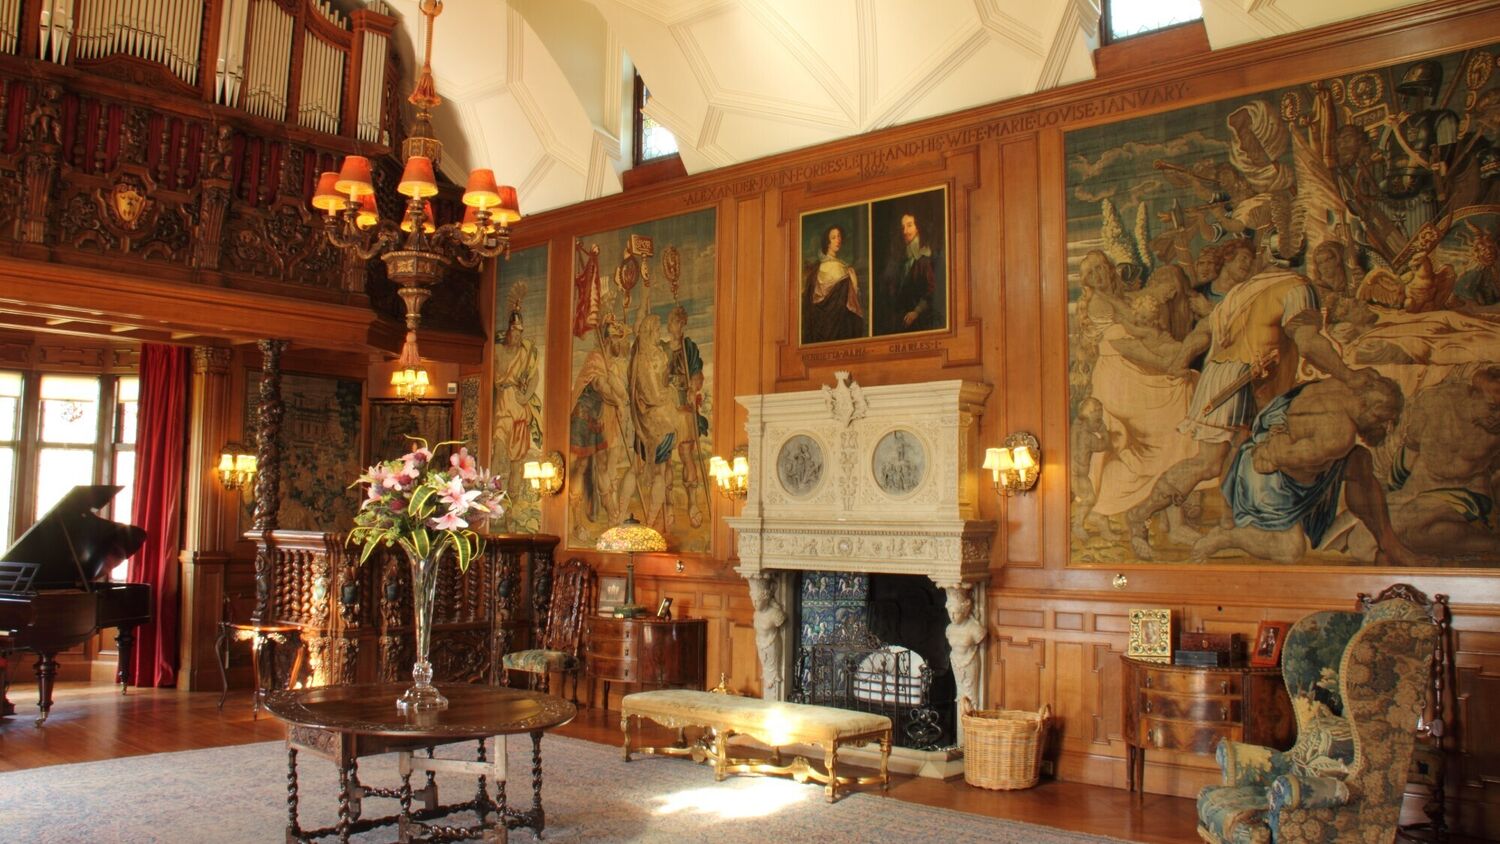 Grand room in a castle, with a large stone fireplace on a wood-panelled wall. There is a grand piano next to the window at one end of the room, and paintings and tapestries on the wall.